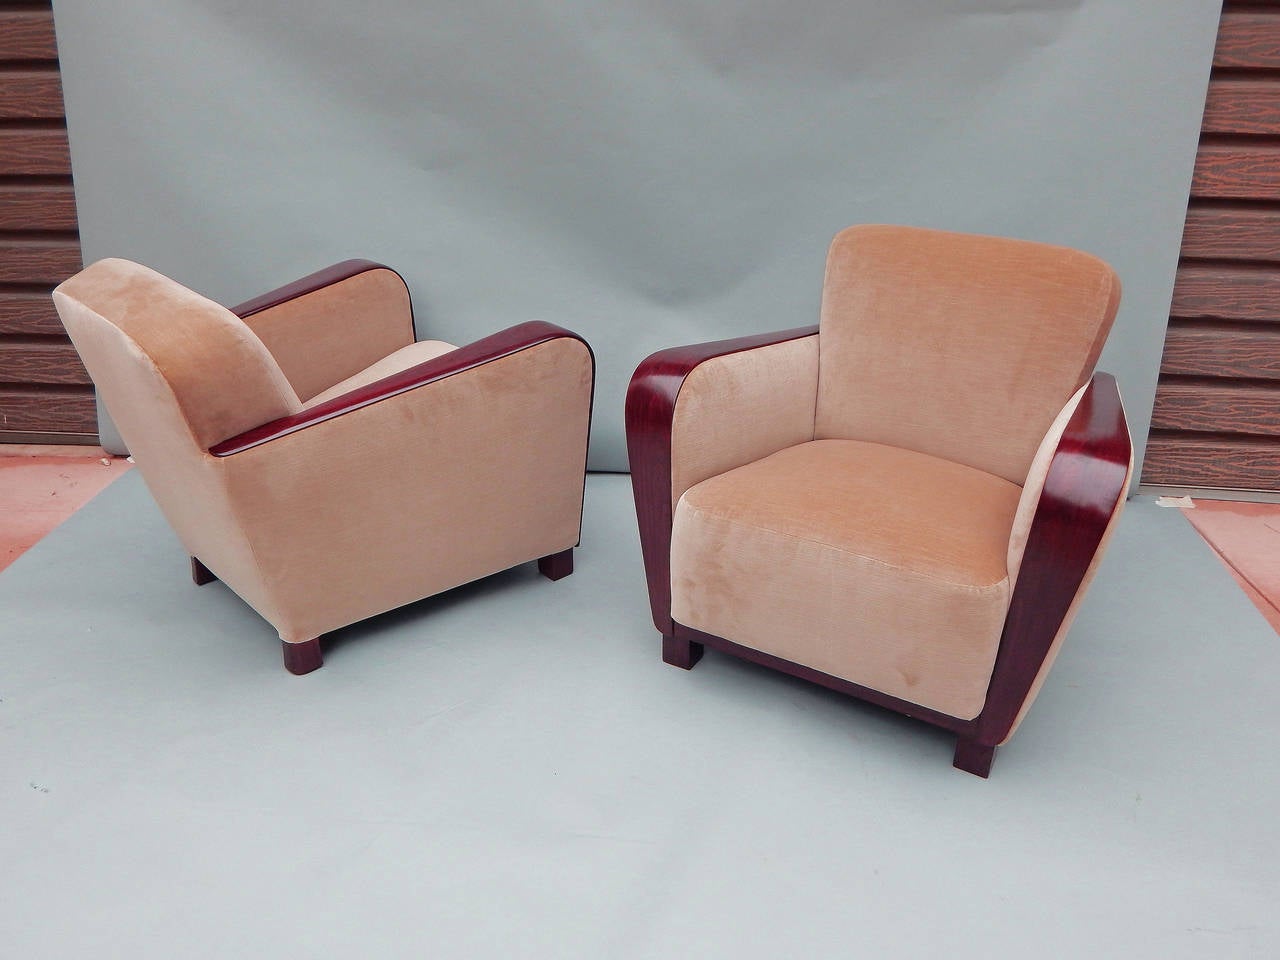 Pair of Swedish art moderne armchairs with paneled birchwood arms. Solid birchwood frames. Wood color is mid-tone brown. Restored and fresh reupholstered in taupe velvet. These are very comfortable, very solid chairs.
Unknown designer, Sweden,